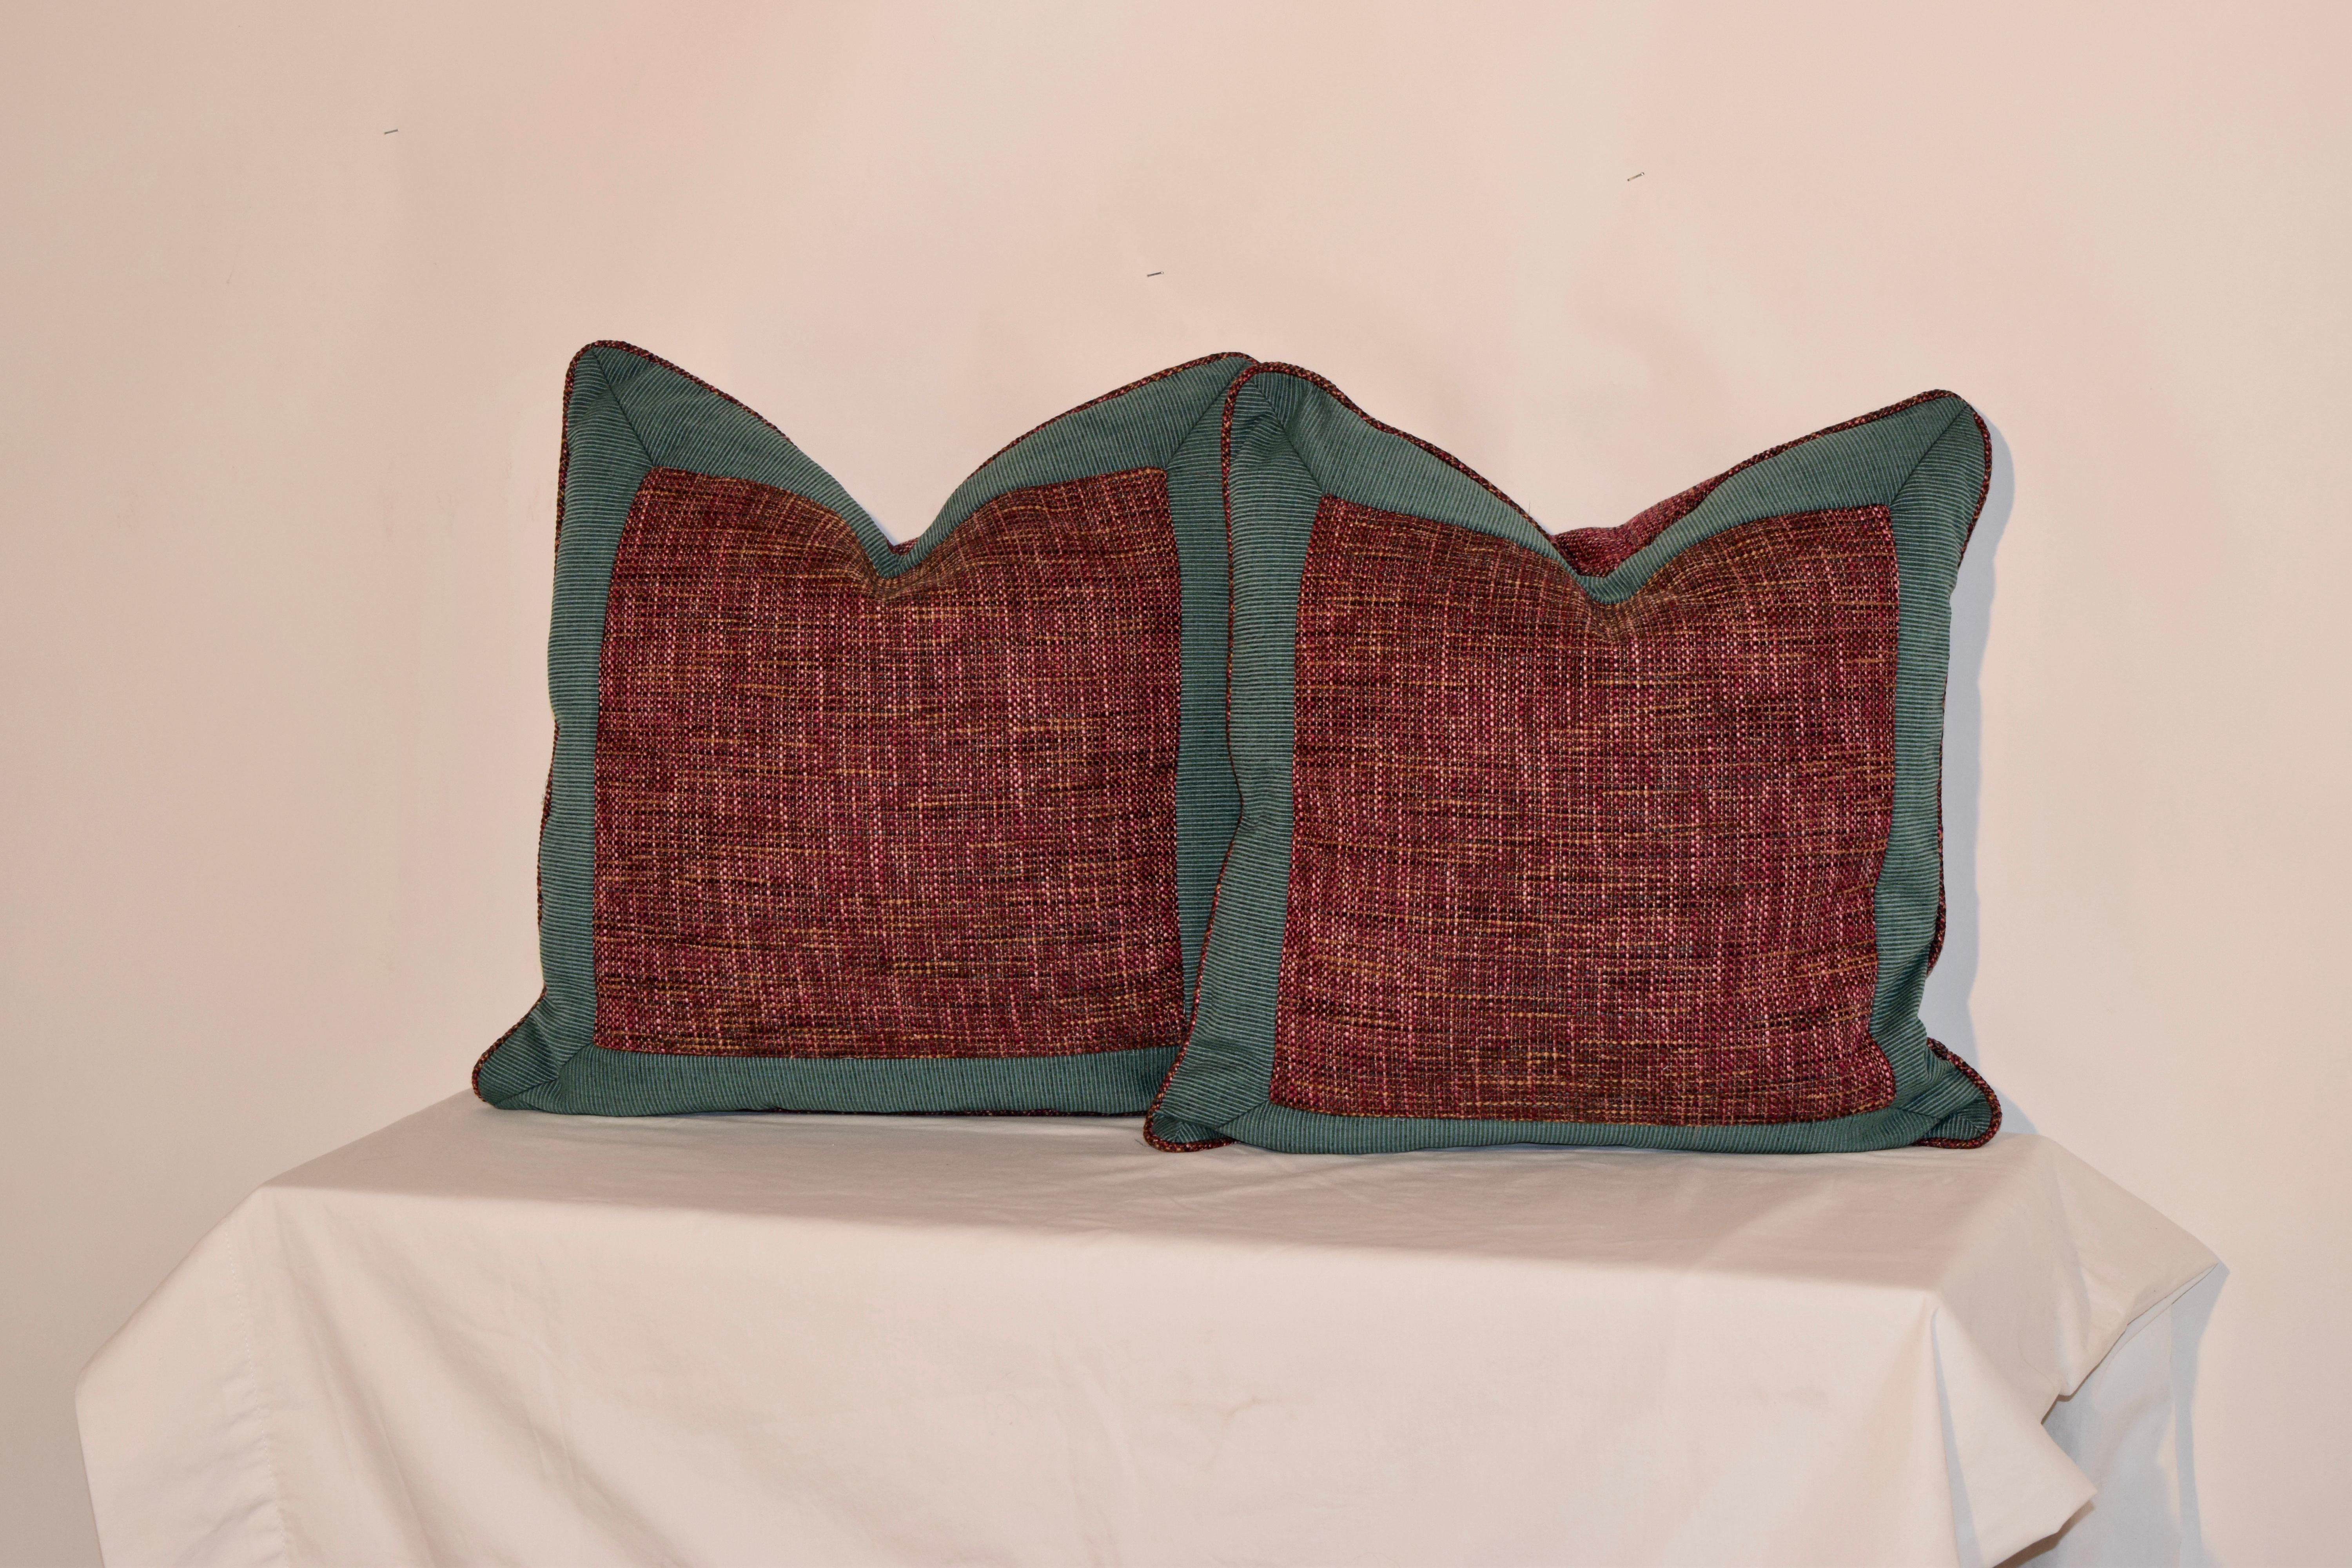 Handmade pillows with a teal faille border surrounding a central square of multicolored woven fabric. The back panels are made from the woven fabric, as well as the welt around the pillows. The pillow covers have hidden zippers and the feather